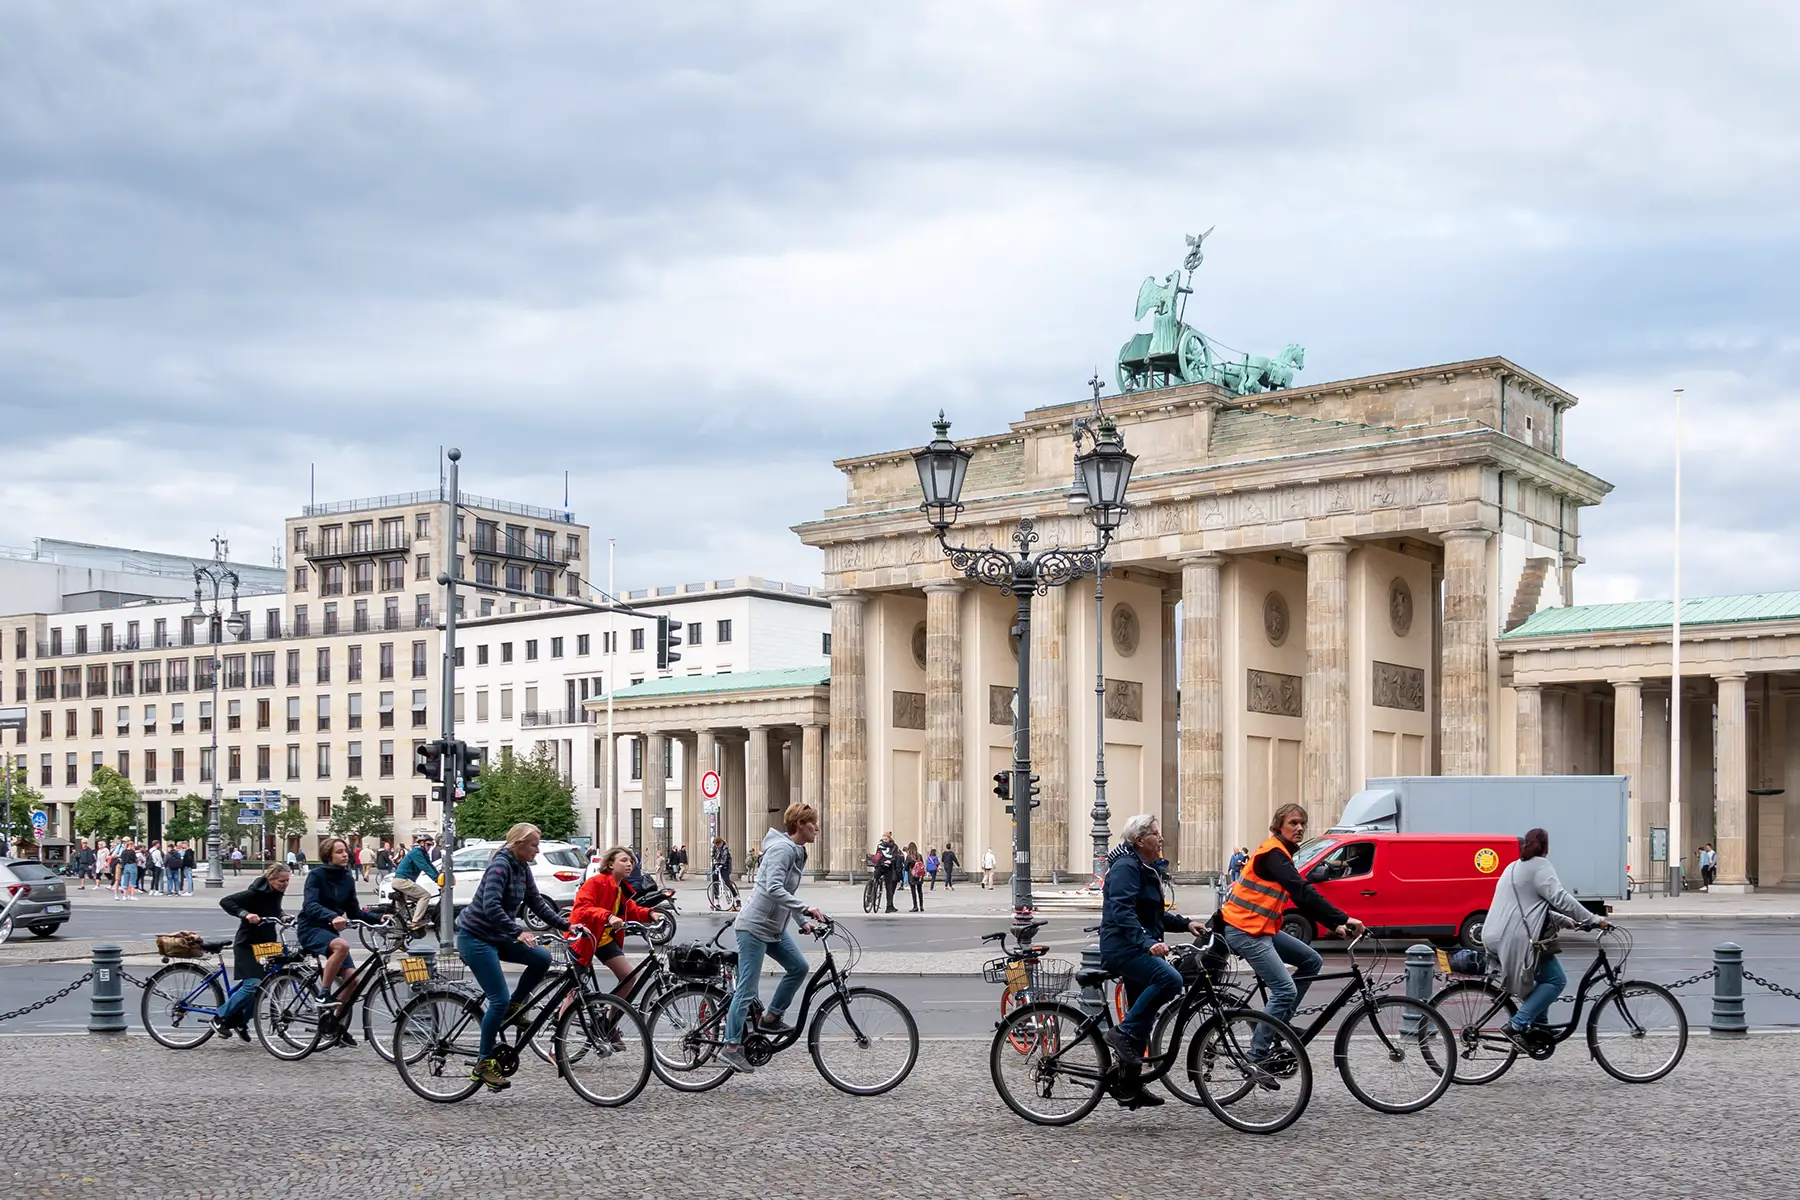 Cyclists in front of Brandenburg Gate in Berlin